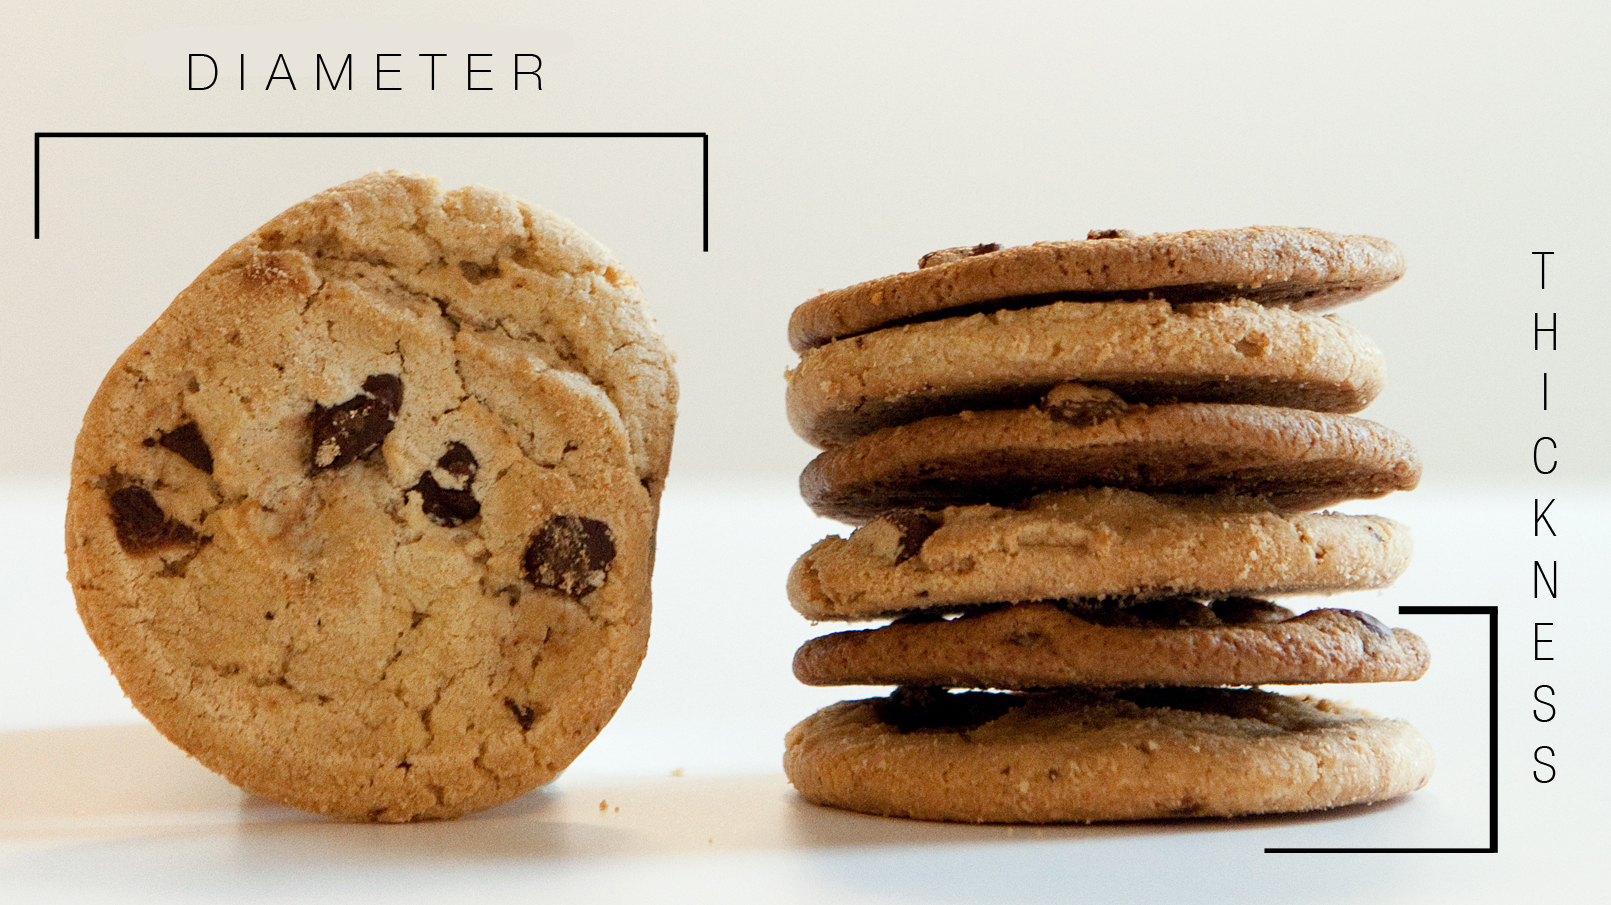 Engineering the perfect cookie: You can control the diameter and thickness of your favorite chocolate chip cookies by changing the temperature of the butter and the amount of flour in the dough. Photo: Morgan Walker/NPR